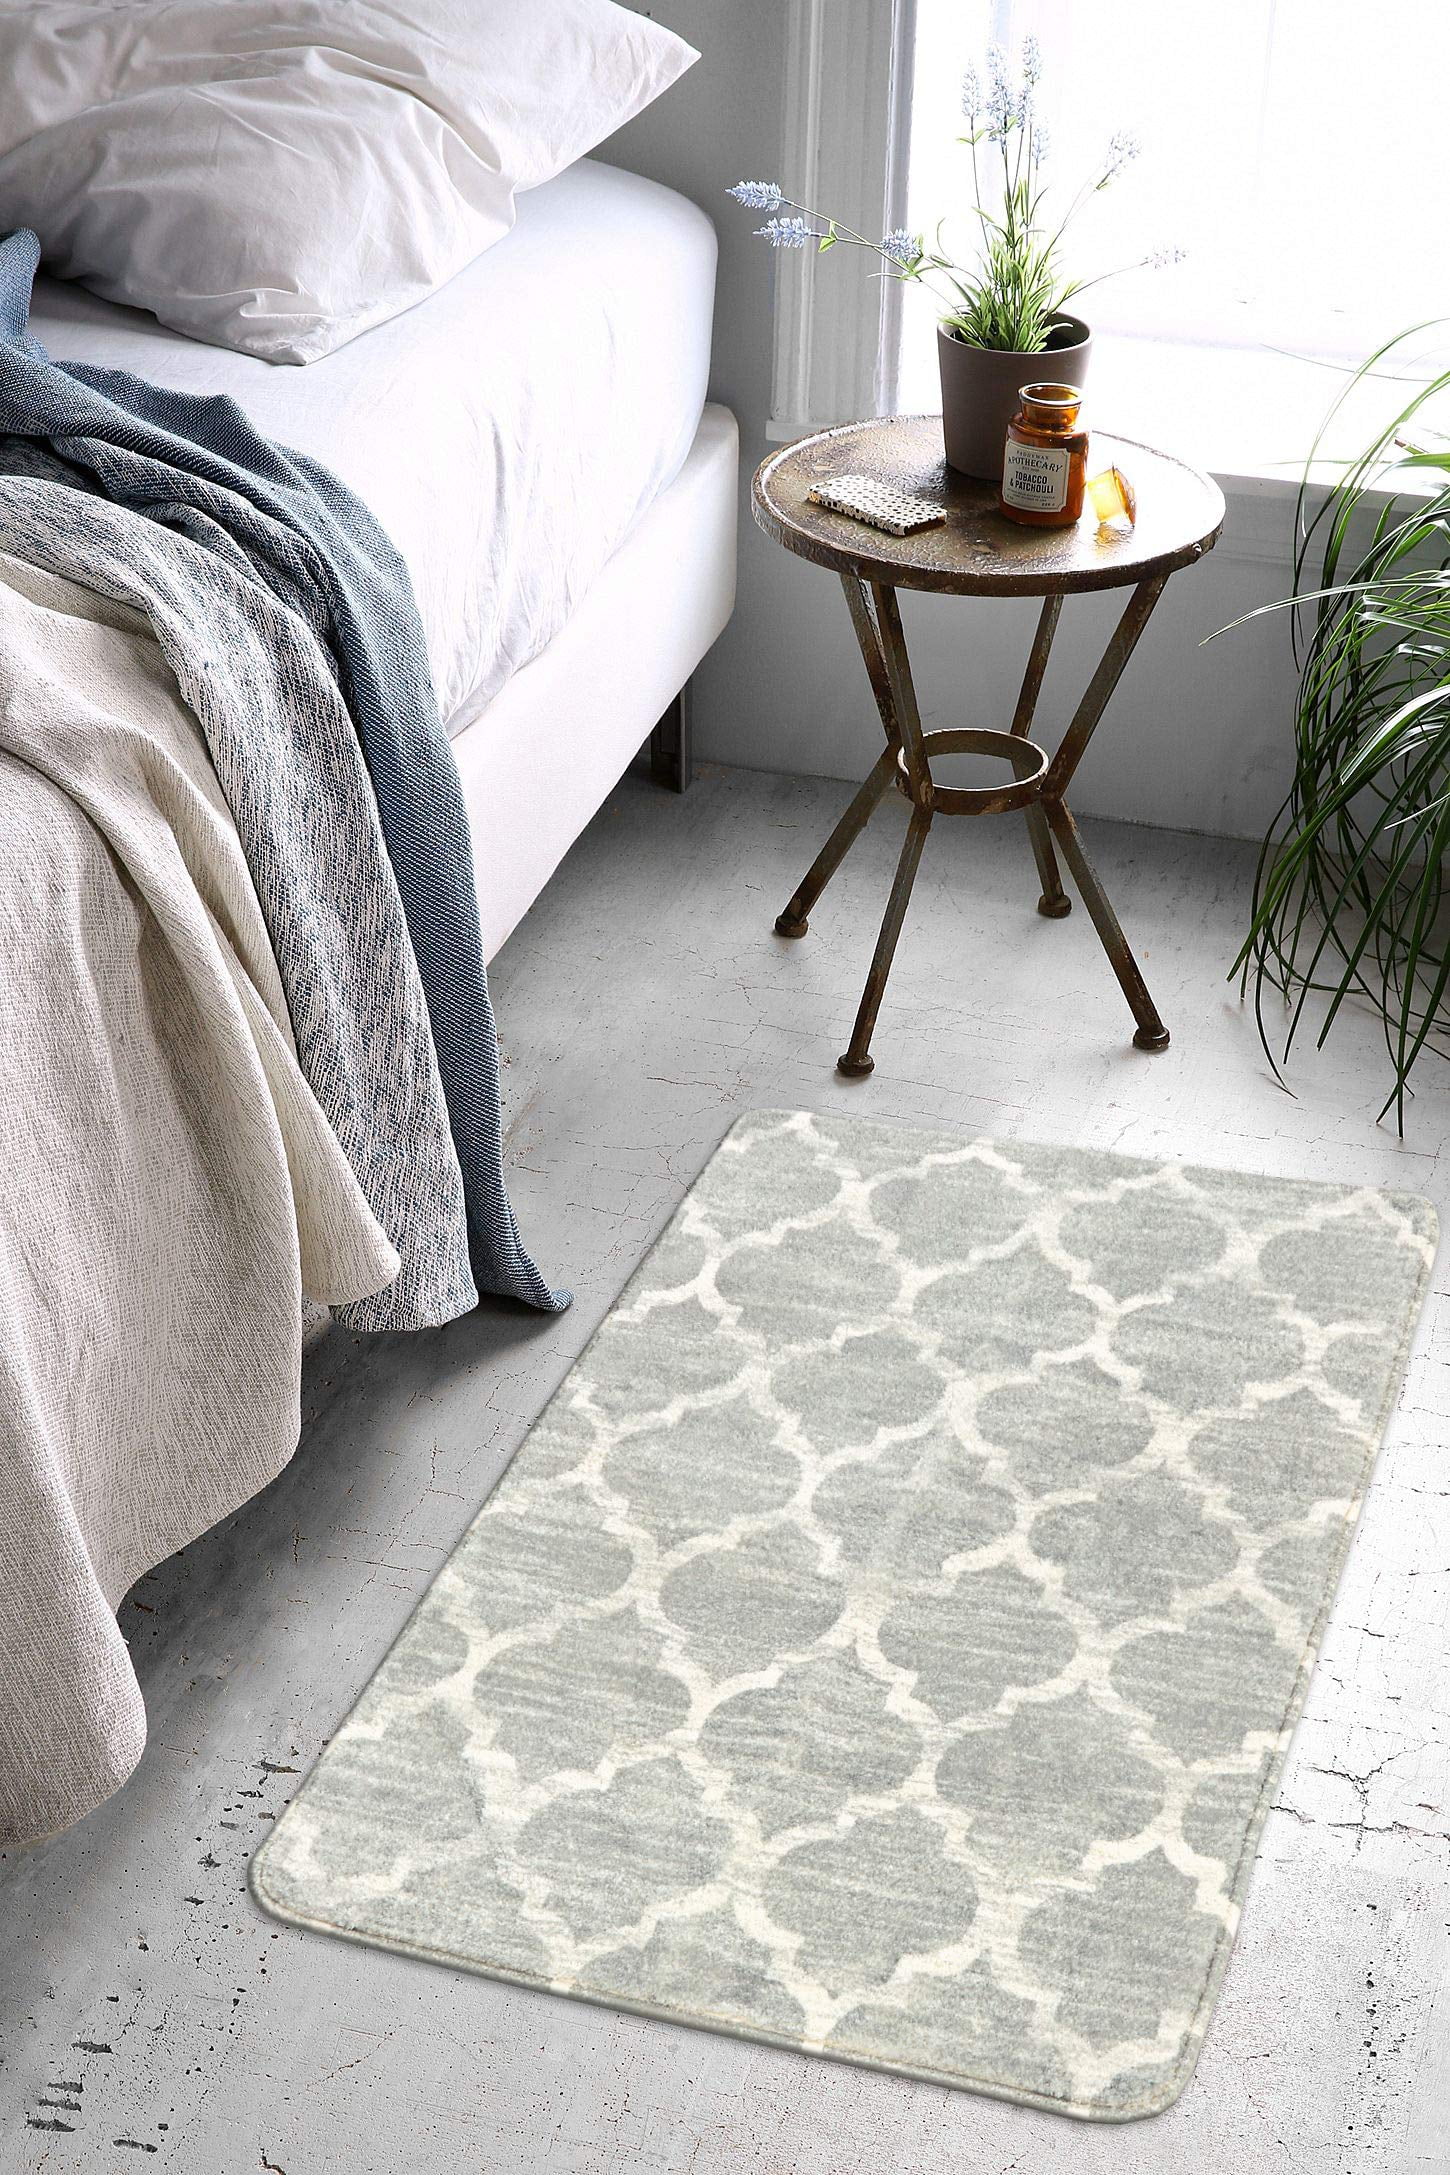 Lahome Moroccan Trellis Area Rug - 2x3 Small Throw Rugs for